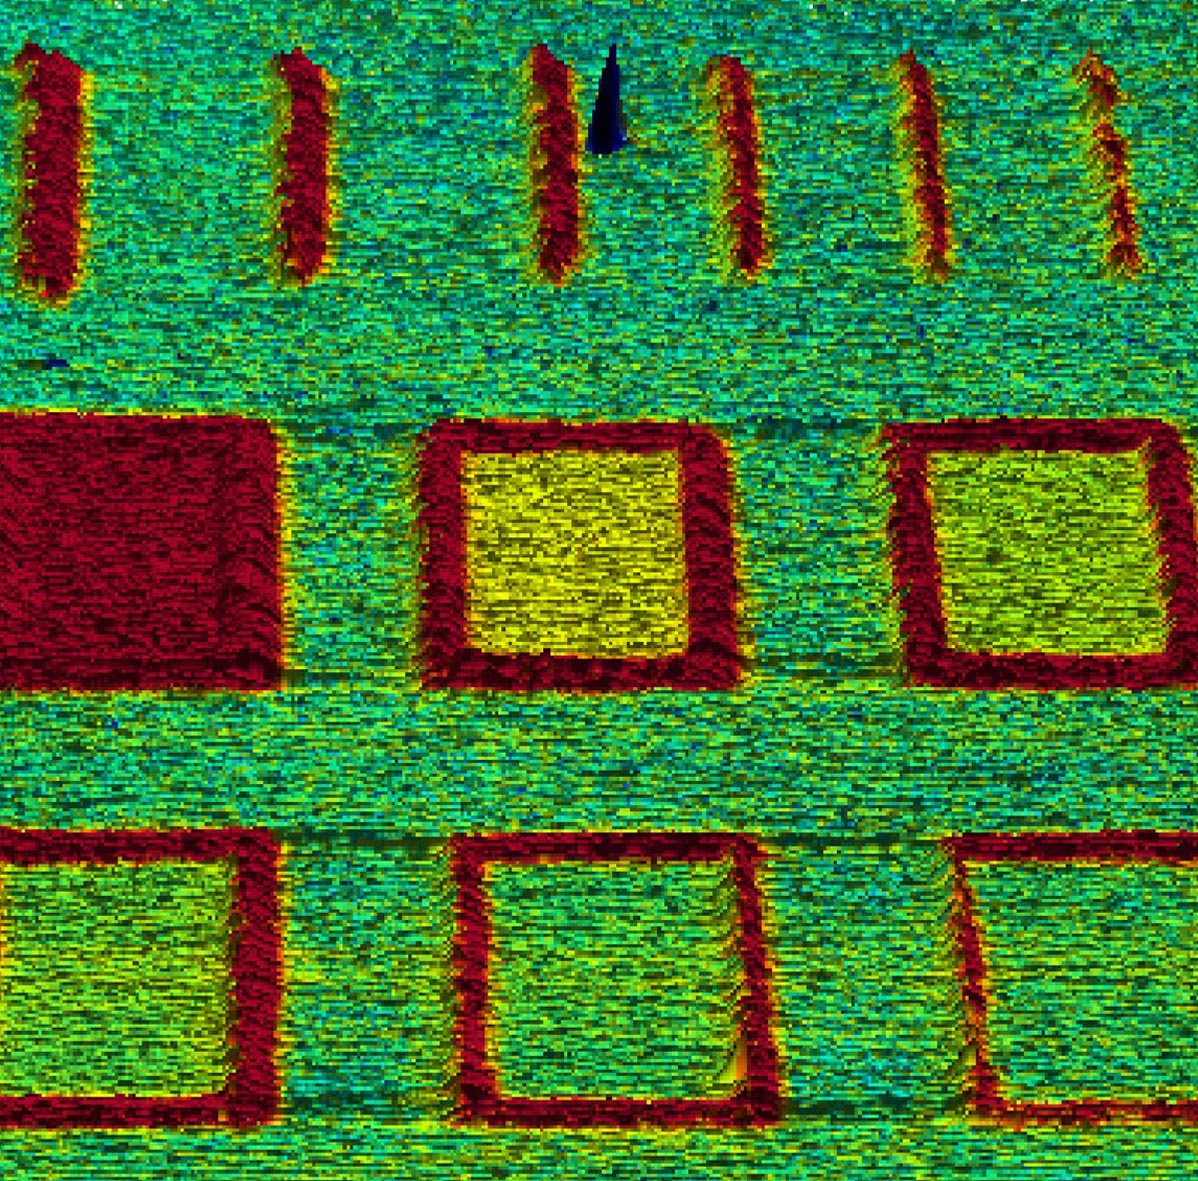 Local Oxidation Nanolithography, ResiScope mode, 5µm